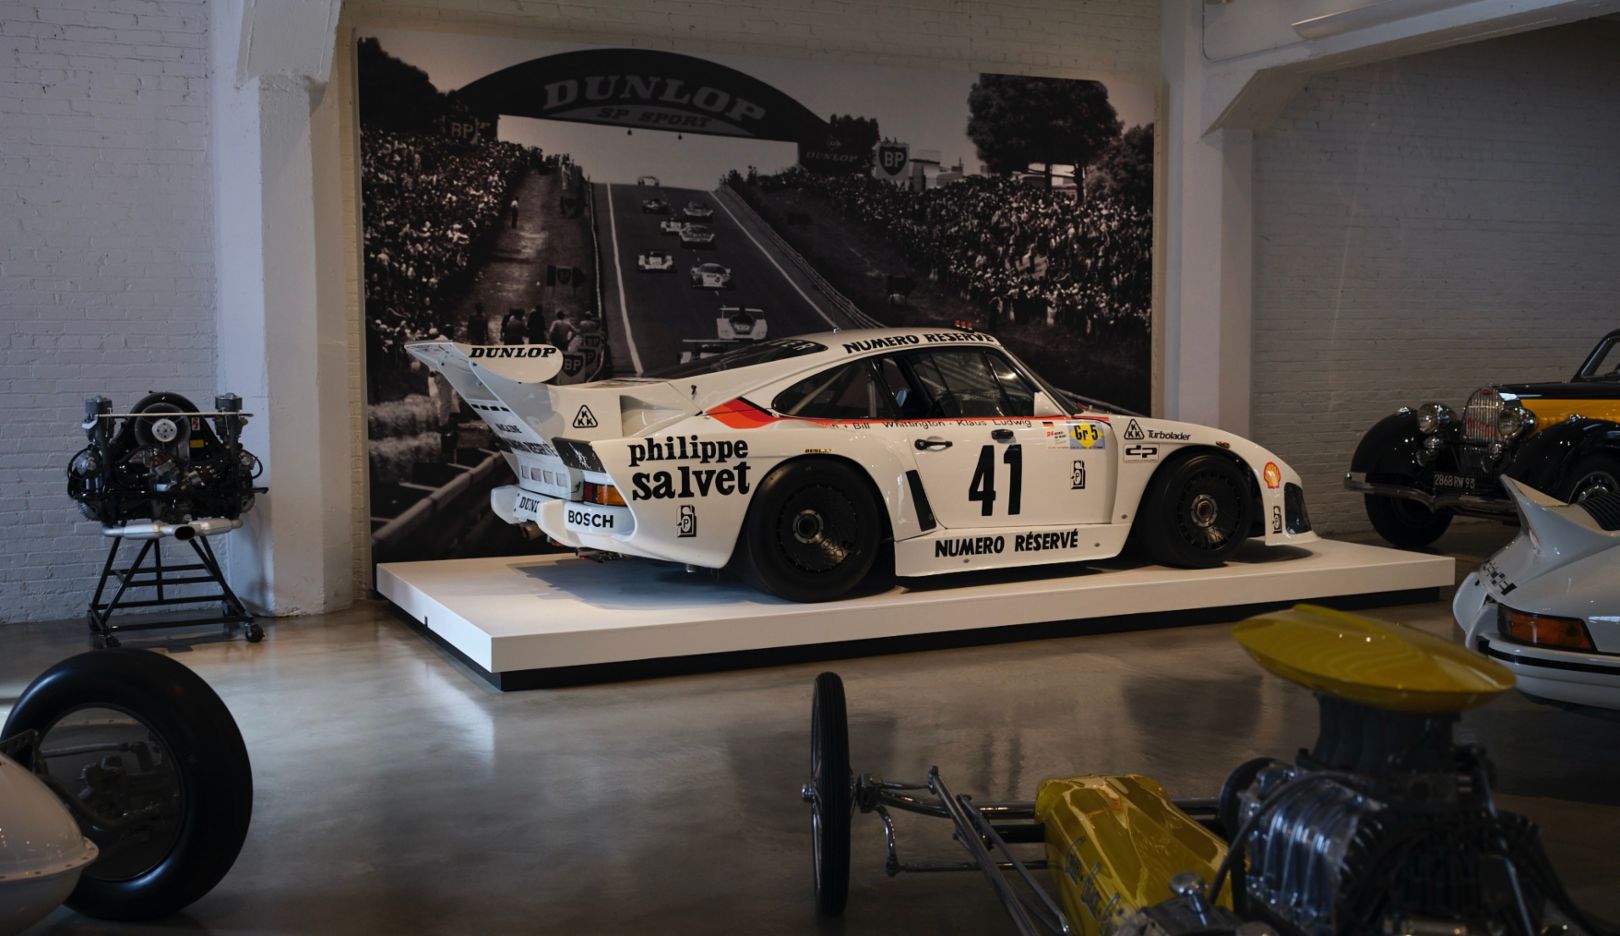 A Le Mans winner among iconic American dragsters: the Kremer-Porsche 935 K3.